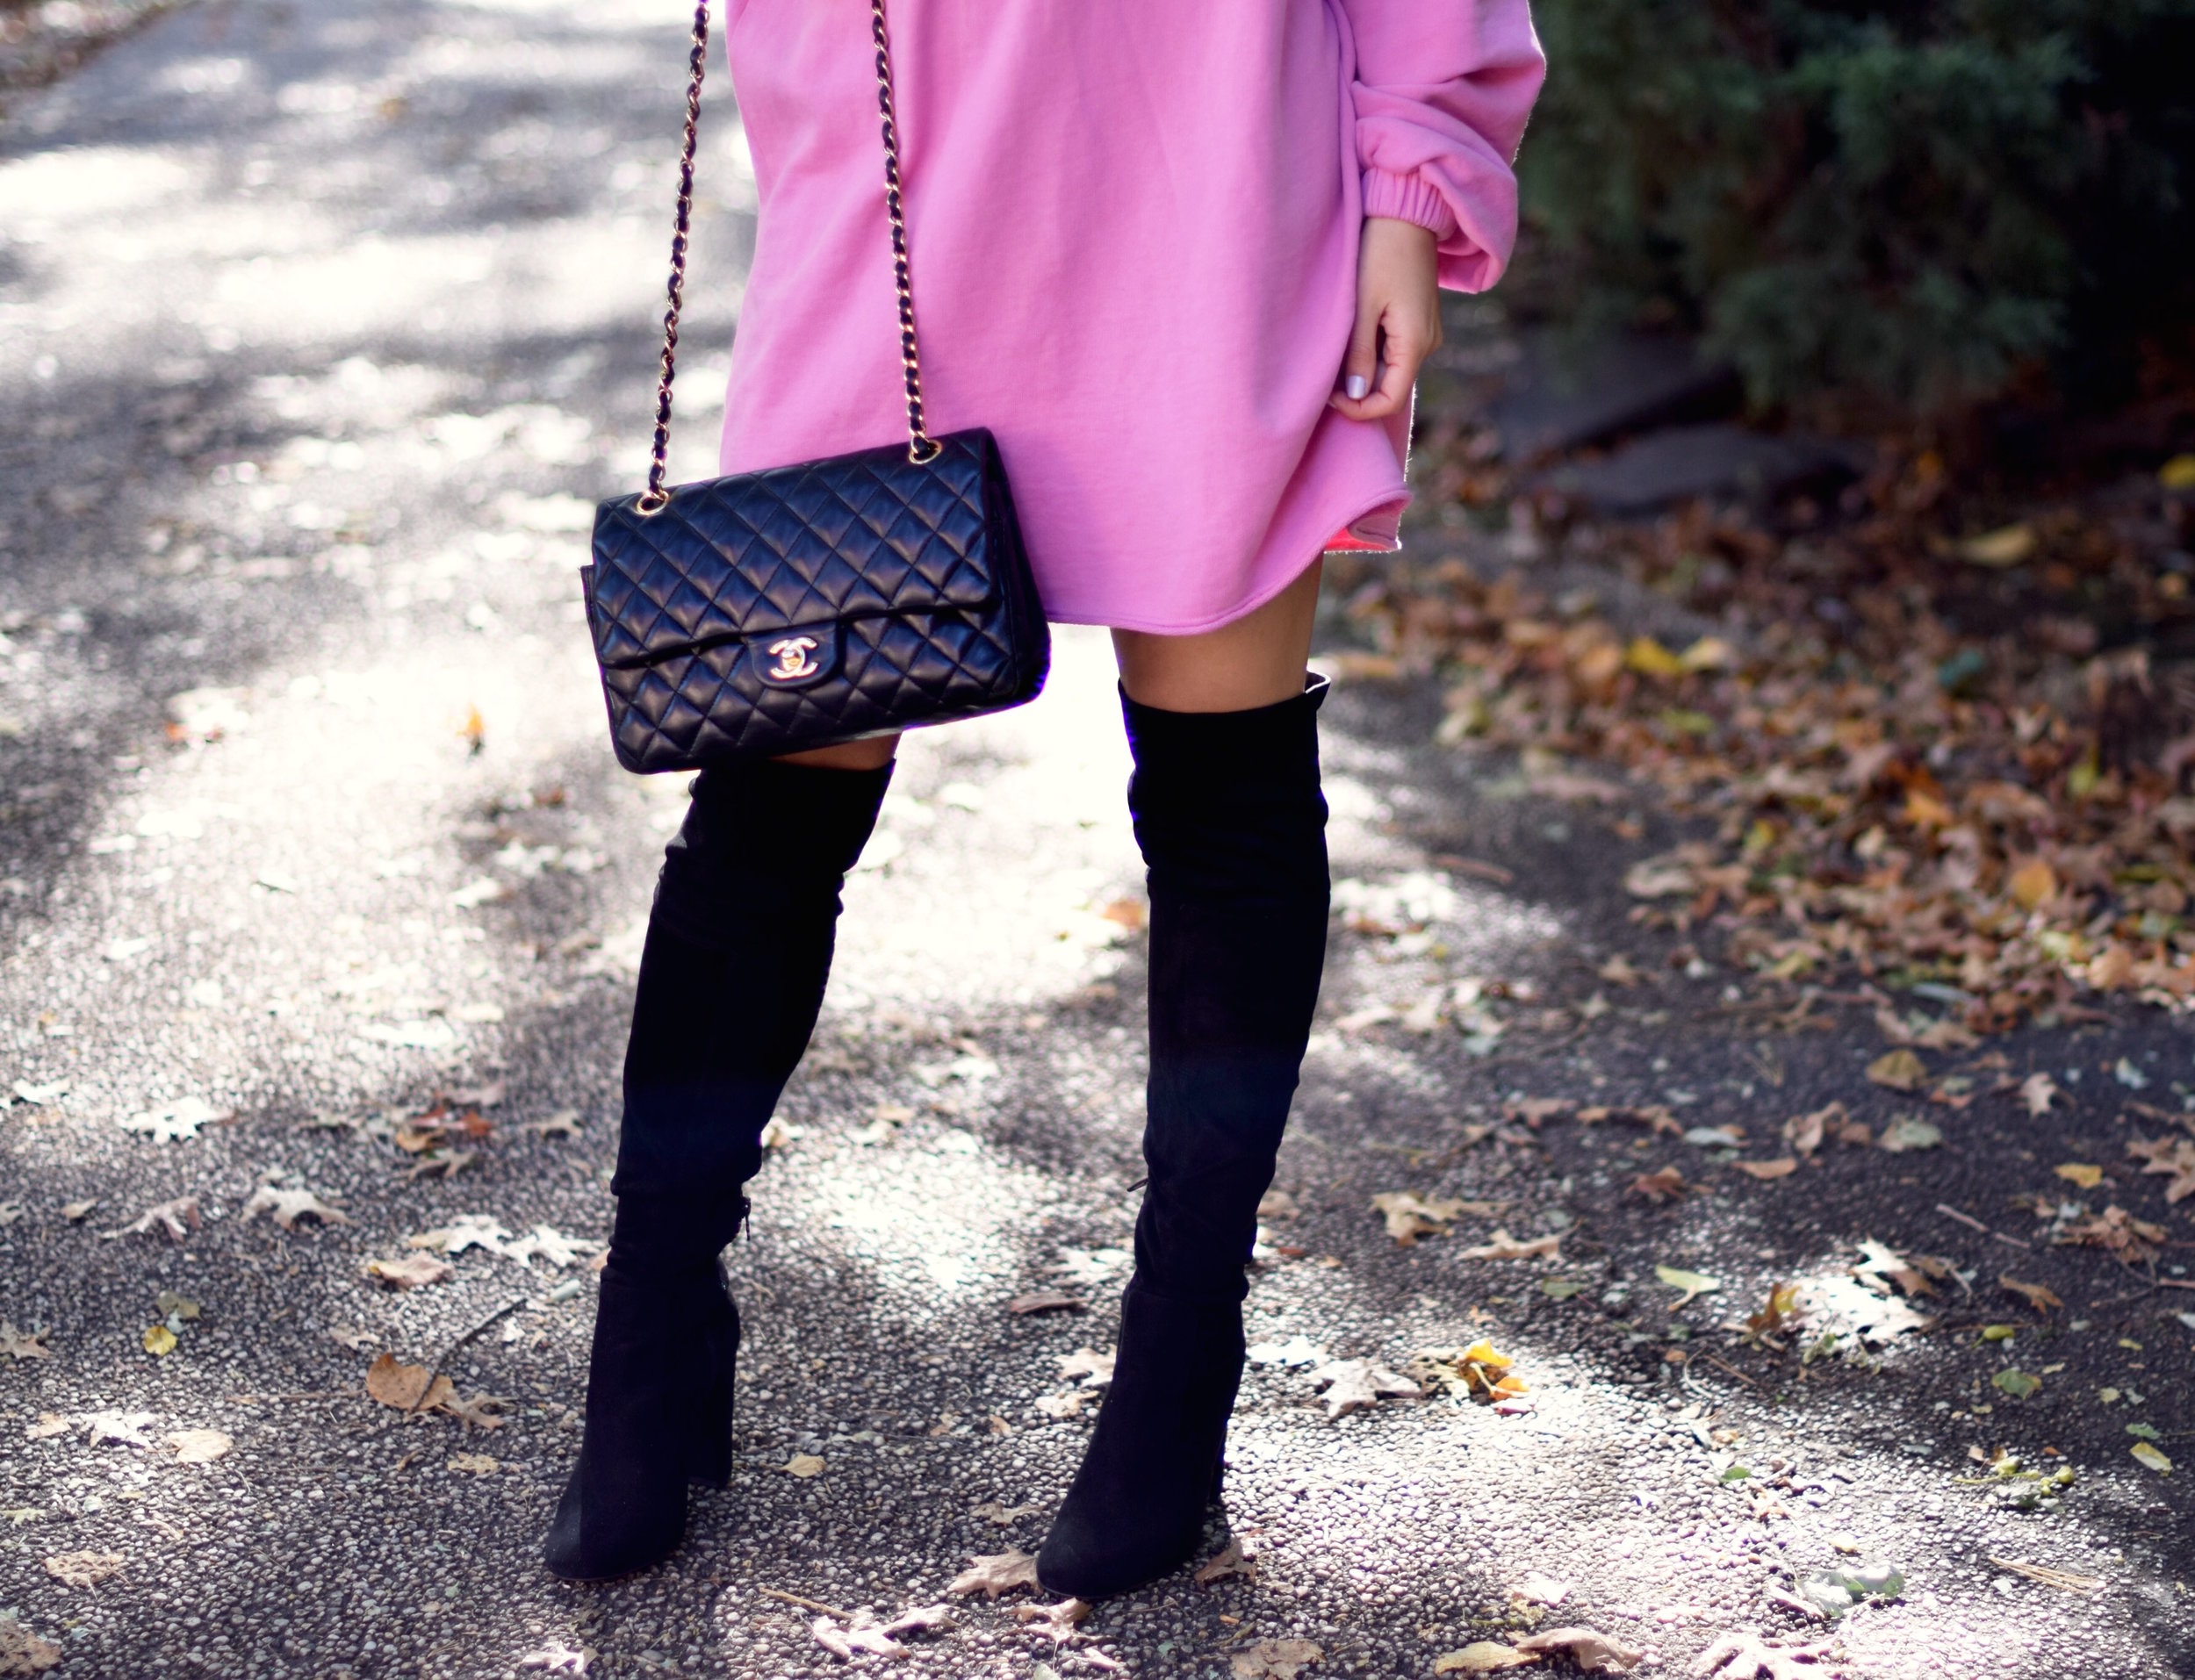 Pink Sweatshirt Dress Black OTK Boots Blogging Before The Days Of Instagram Esther Santer Fashion Blog NYC Street Style Blogger Outfit OOTD Trendy Over The Knee Hair Girl Women New York Chanel Bag  Designer ASOS  Pretty Shopping Sale Beautiful Winter.jpg